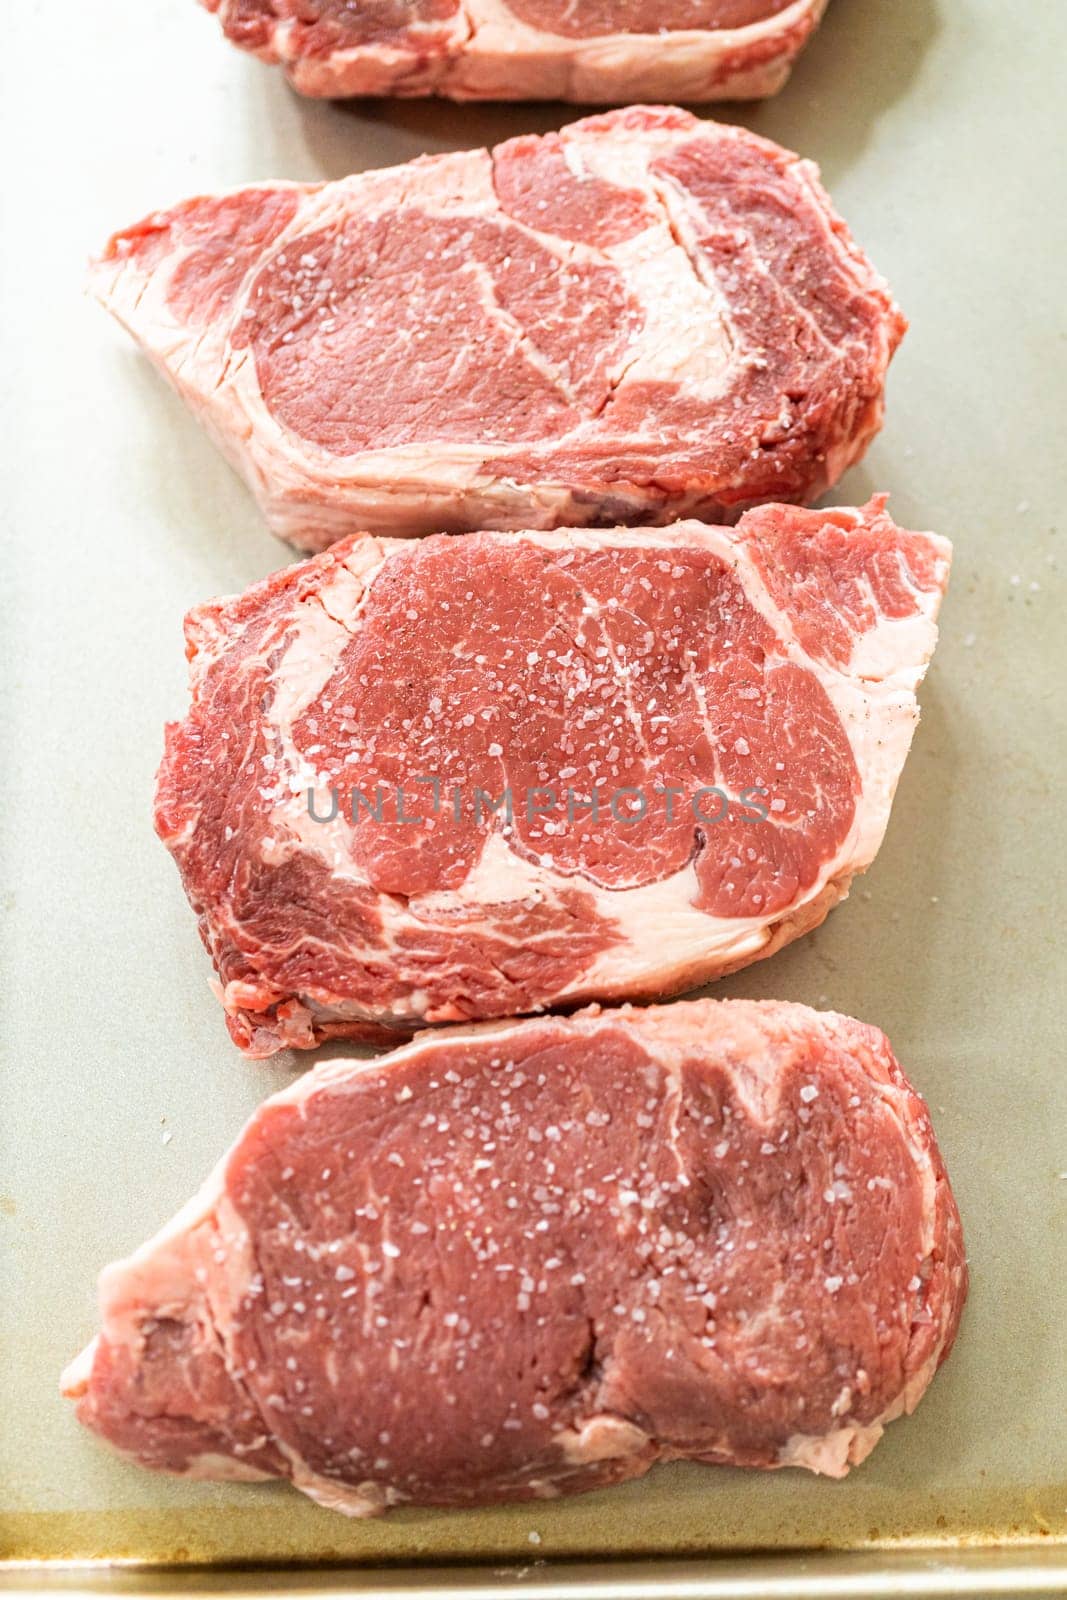 Situated in a modern white kitchen, a seasoned rib eye steak, boasting its beautiful marbling, sits ready on a baking sheet. It is prepared for the outdoor gas grill, promising a perfect sear on the exterior and a juicy, tender interior, heralding an upcoming indulgent feast.